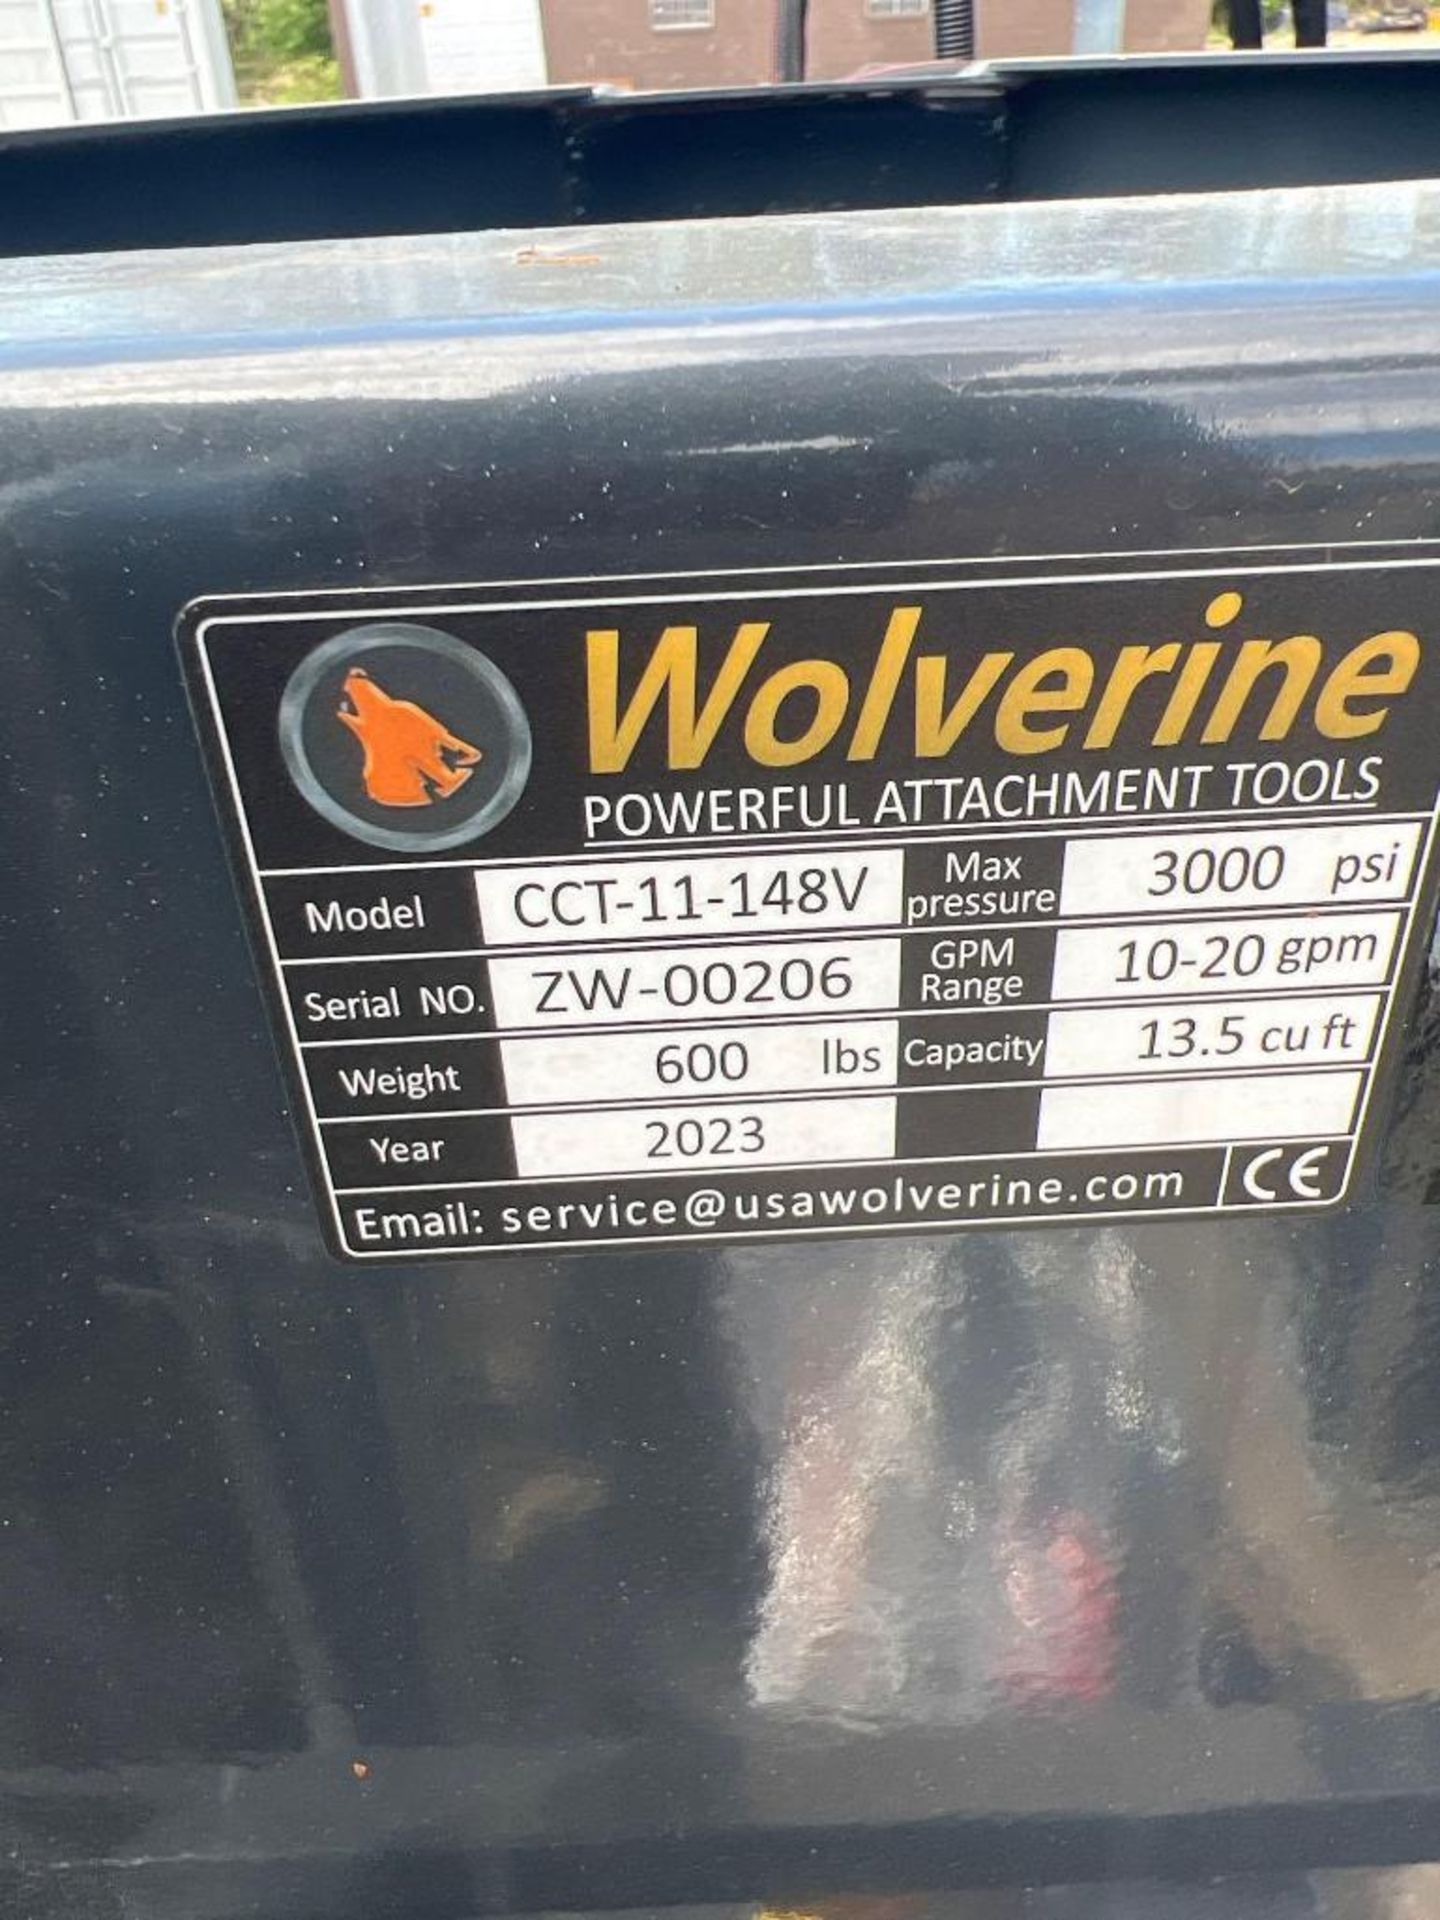 Wolverine Skid Steer Hydraulic Concrete Chuter Model CCT-11-148V - Image 3 of 4